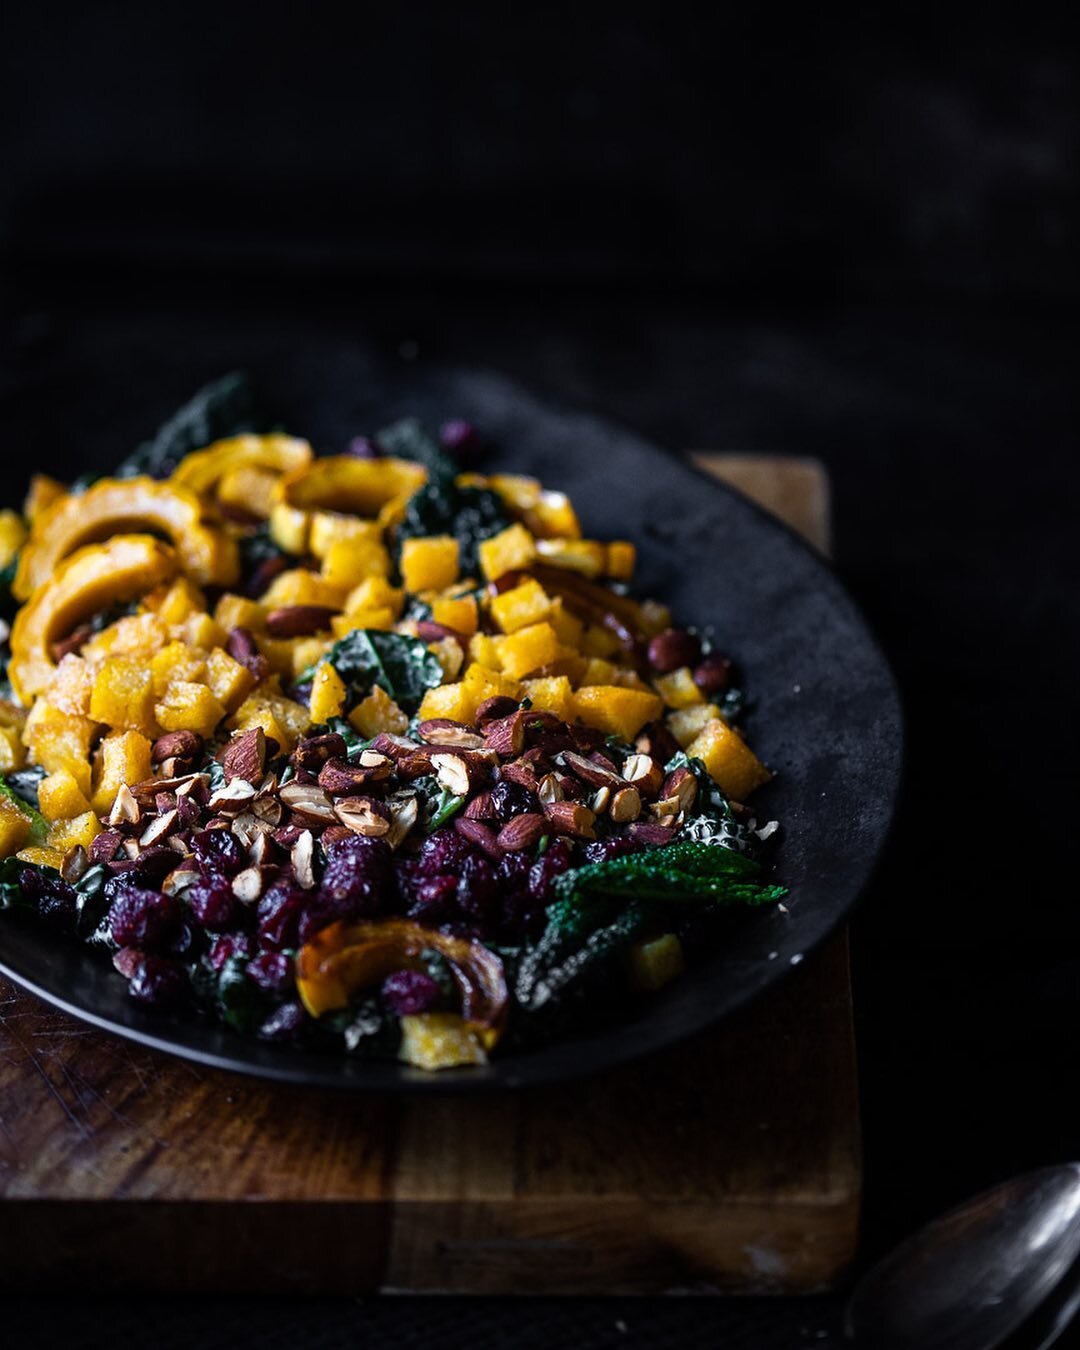 Squash, polenta, and kale Caesar salad!

Another squash salad option for your holiday (or just everyday) table. This one has crispy polenta croutons, spiced nuts, roasted delicata squash, and a garlicky tahini Caesar dressing that I would eat with a 